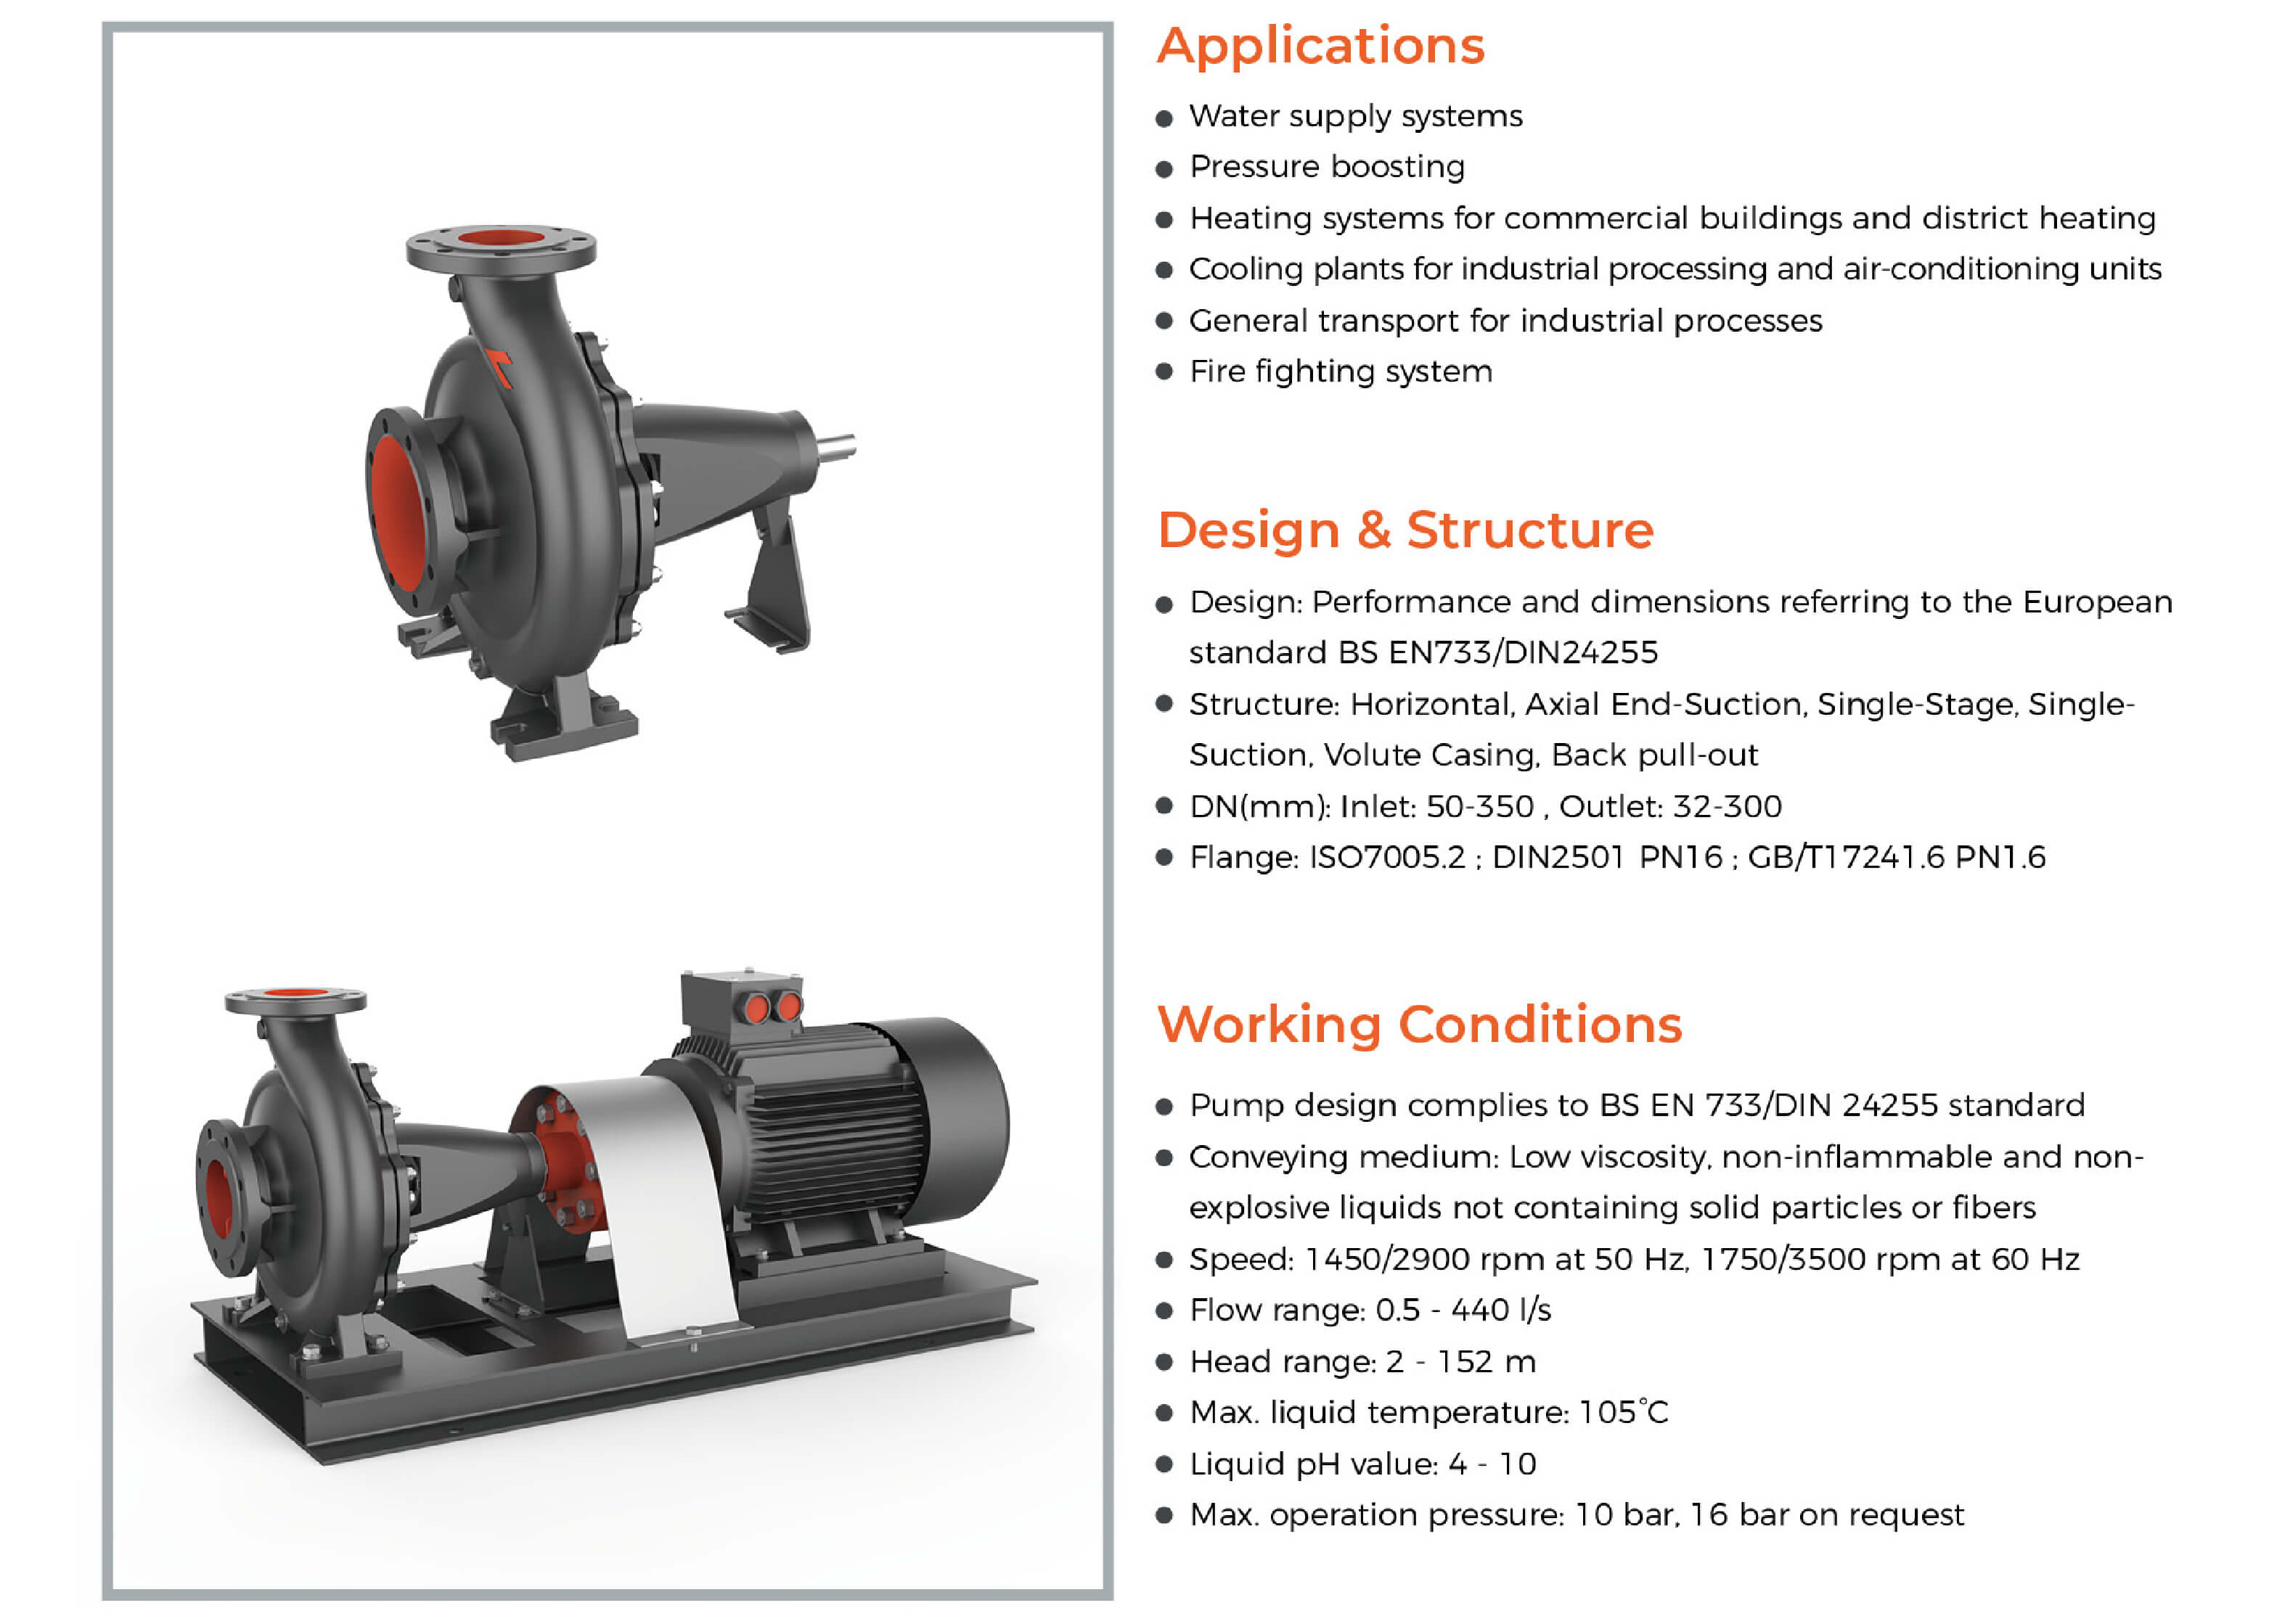 LEP End Suction Centrifugal Pump Features